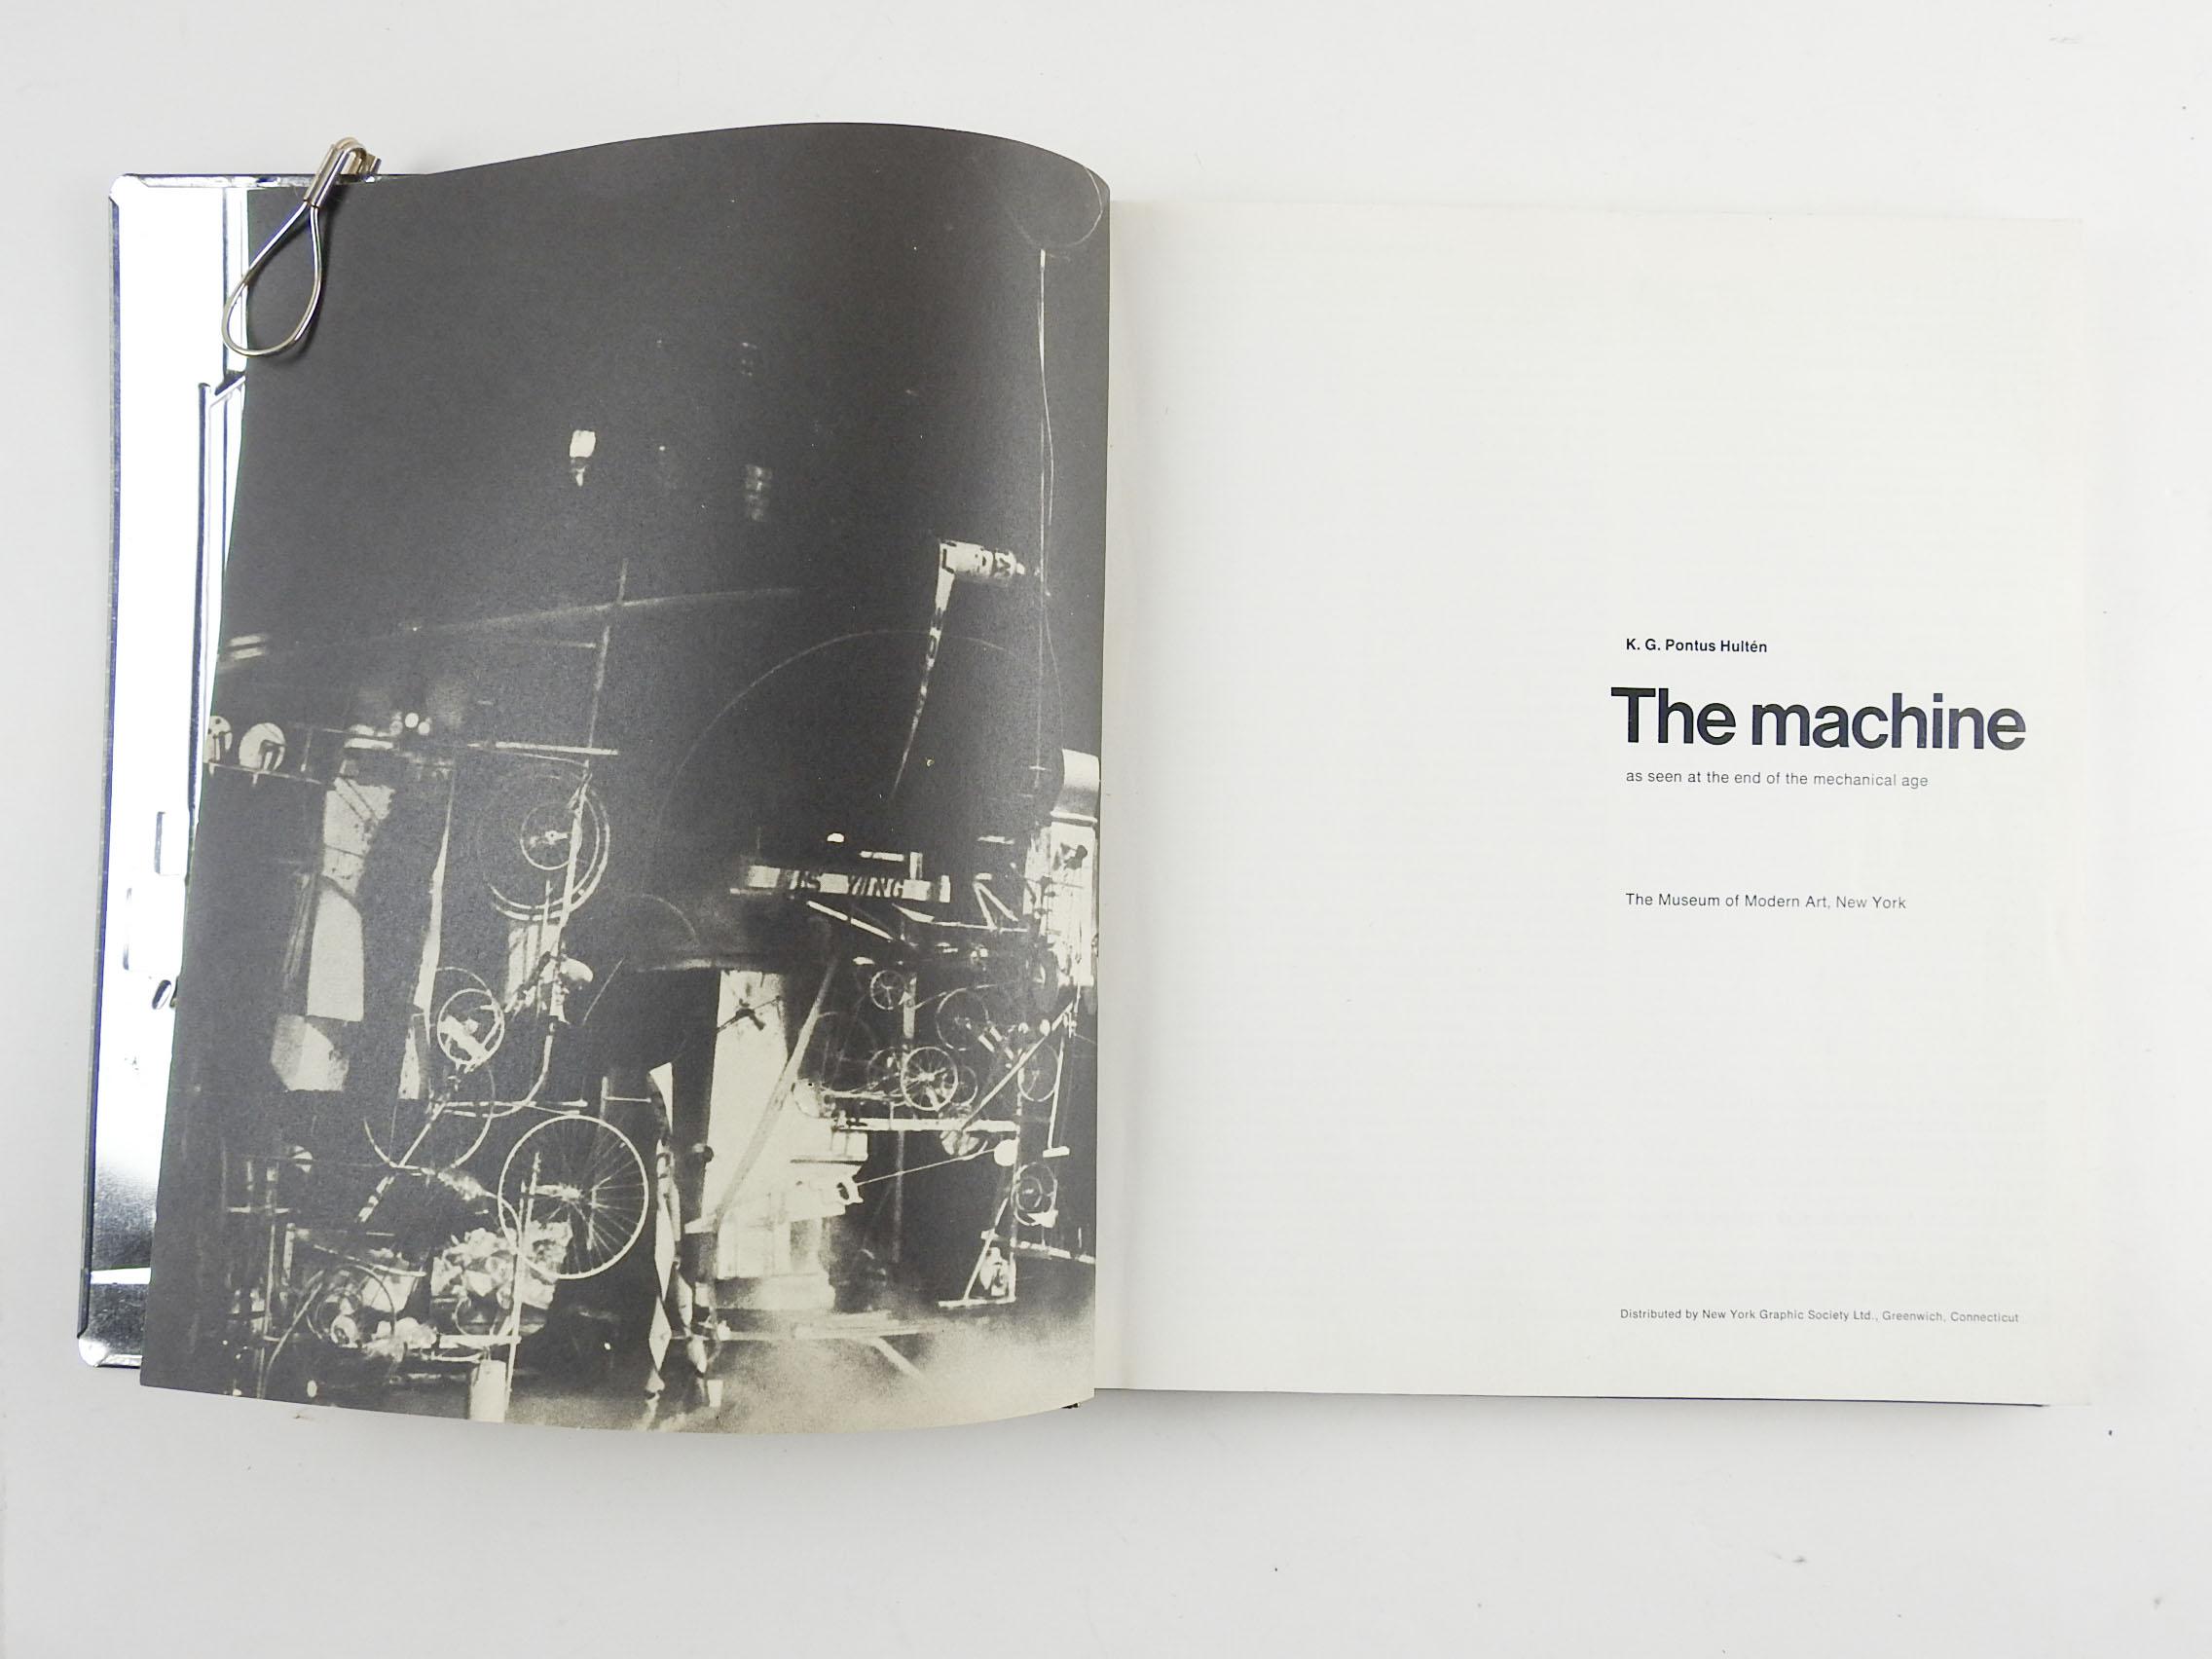 The Machine: As Seen At The End Of The Mechanical Age by K. G. Pontus Hulten. Museum of Modern Art, New York, 1968. Embossed aluminum boards designed by Anders Osterlin after a photograph of MoMA by Alicia Legg. Illustrated. Catalog of the